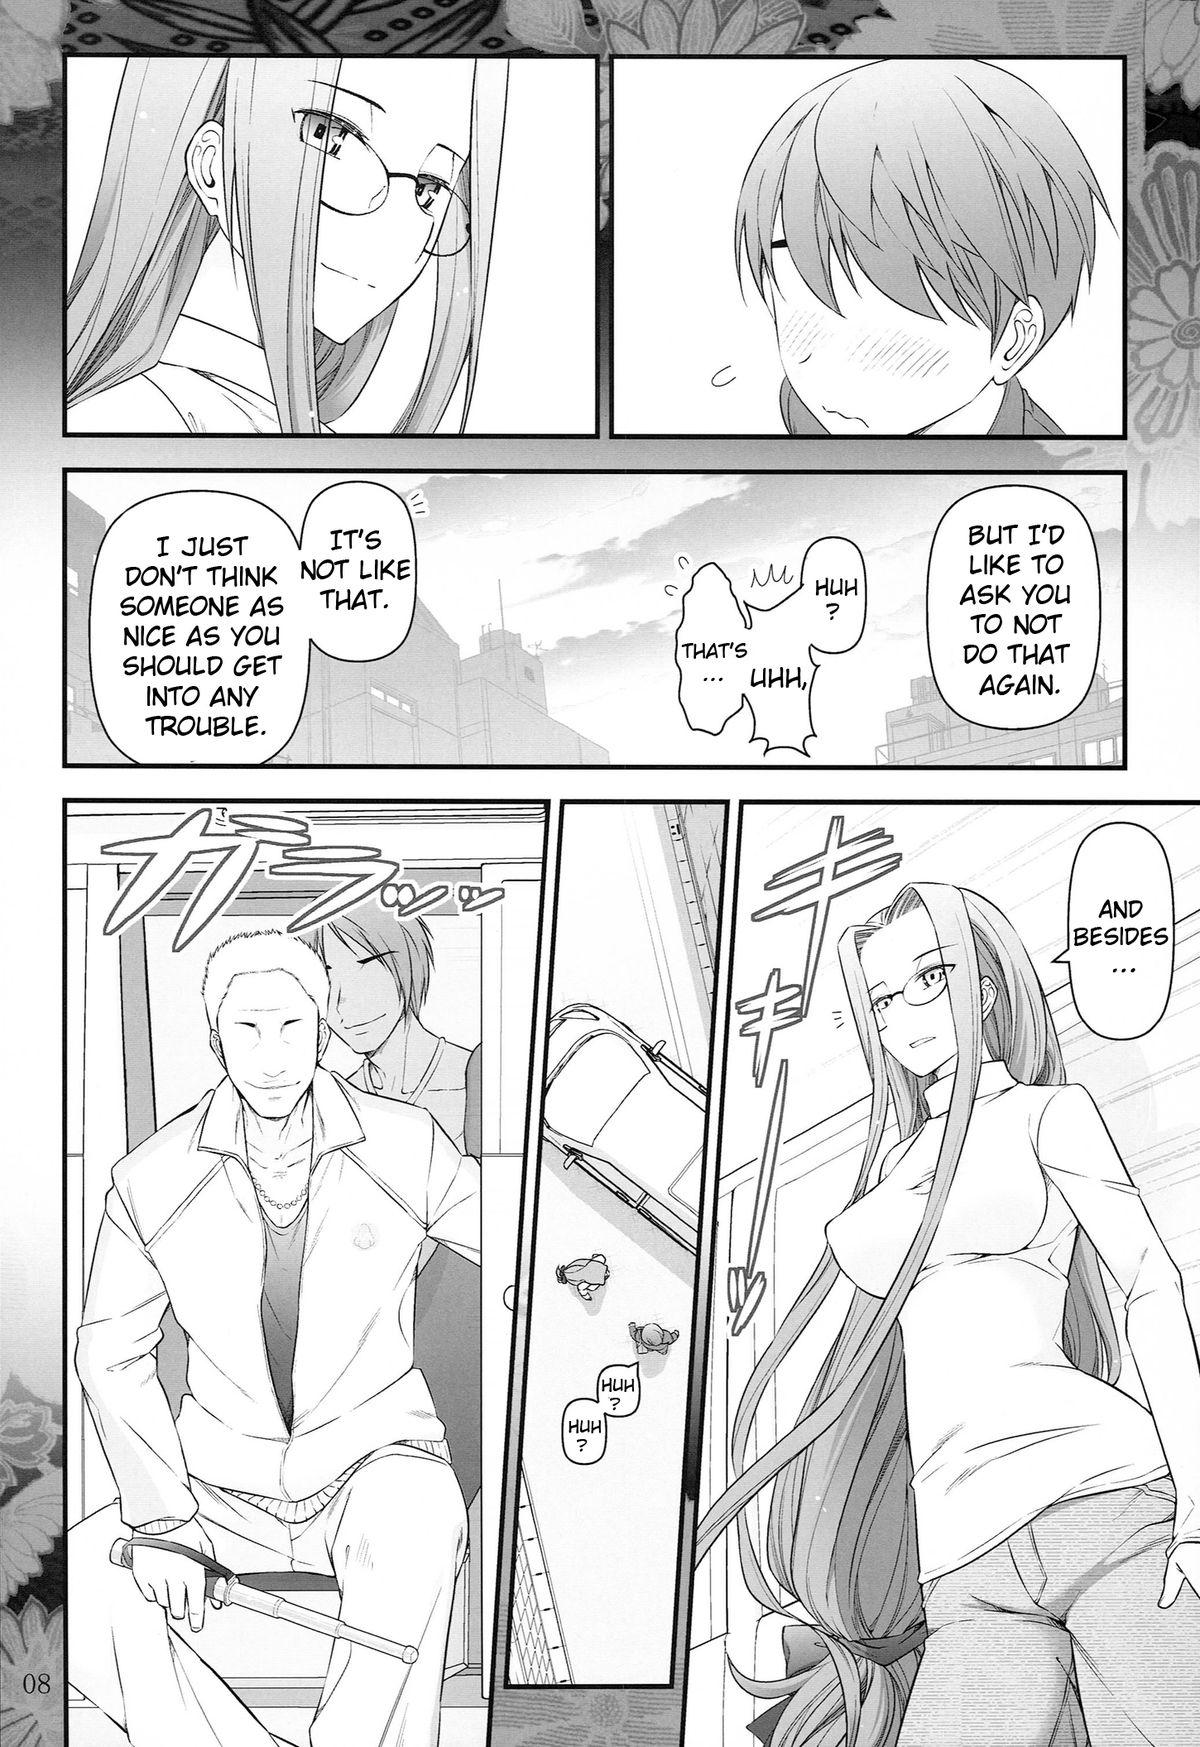 Stepbro Fate/stay night Rider-san to Shounen no Nichijou | Fate/Stay Night Rider and Shounen's Daily Affection - Fate stay night Banging - Page 9